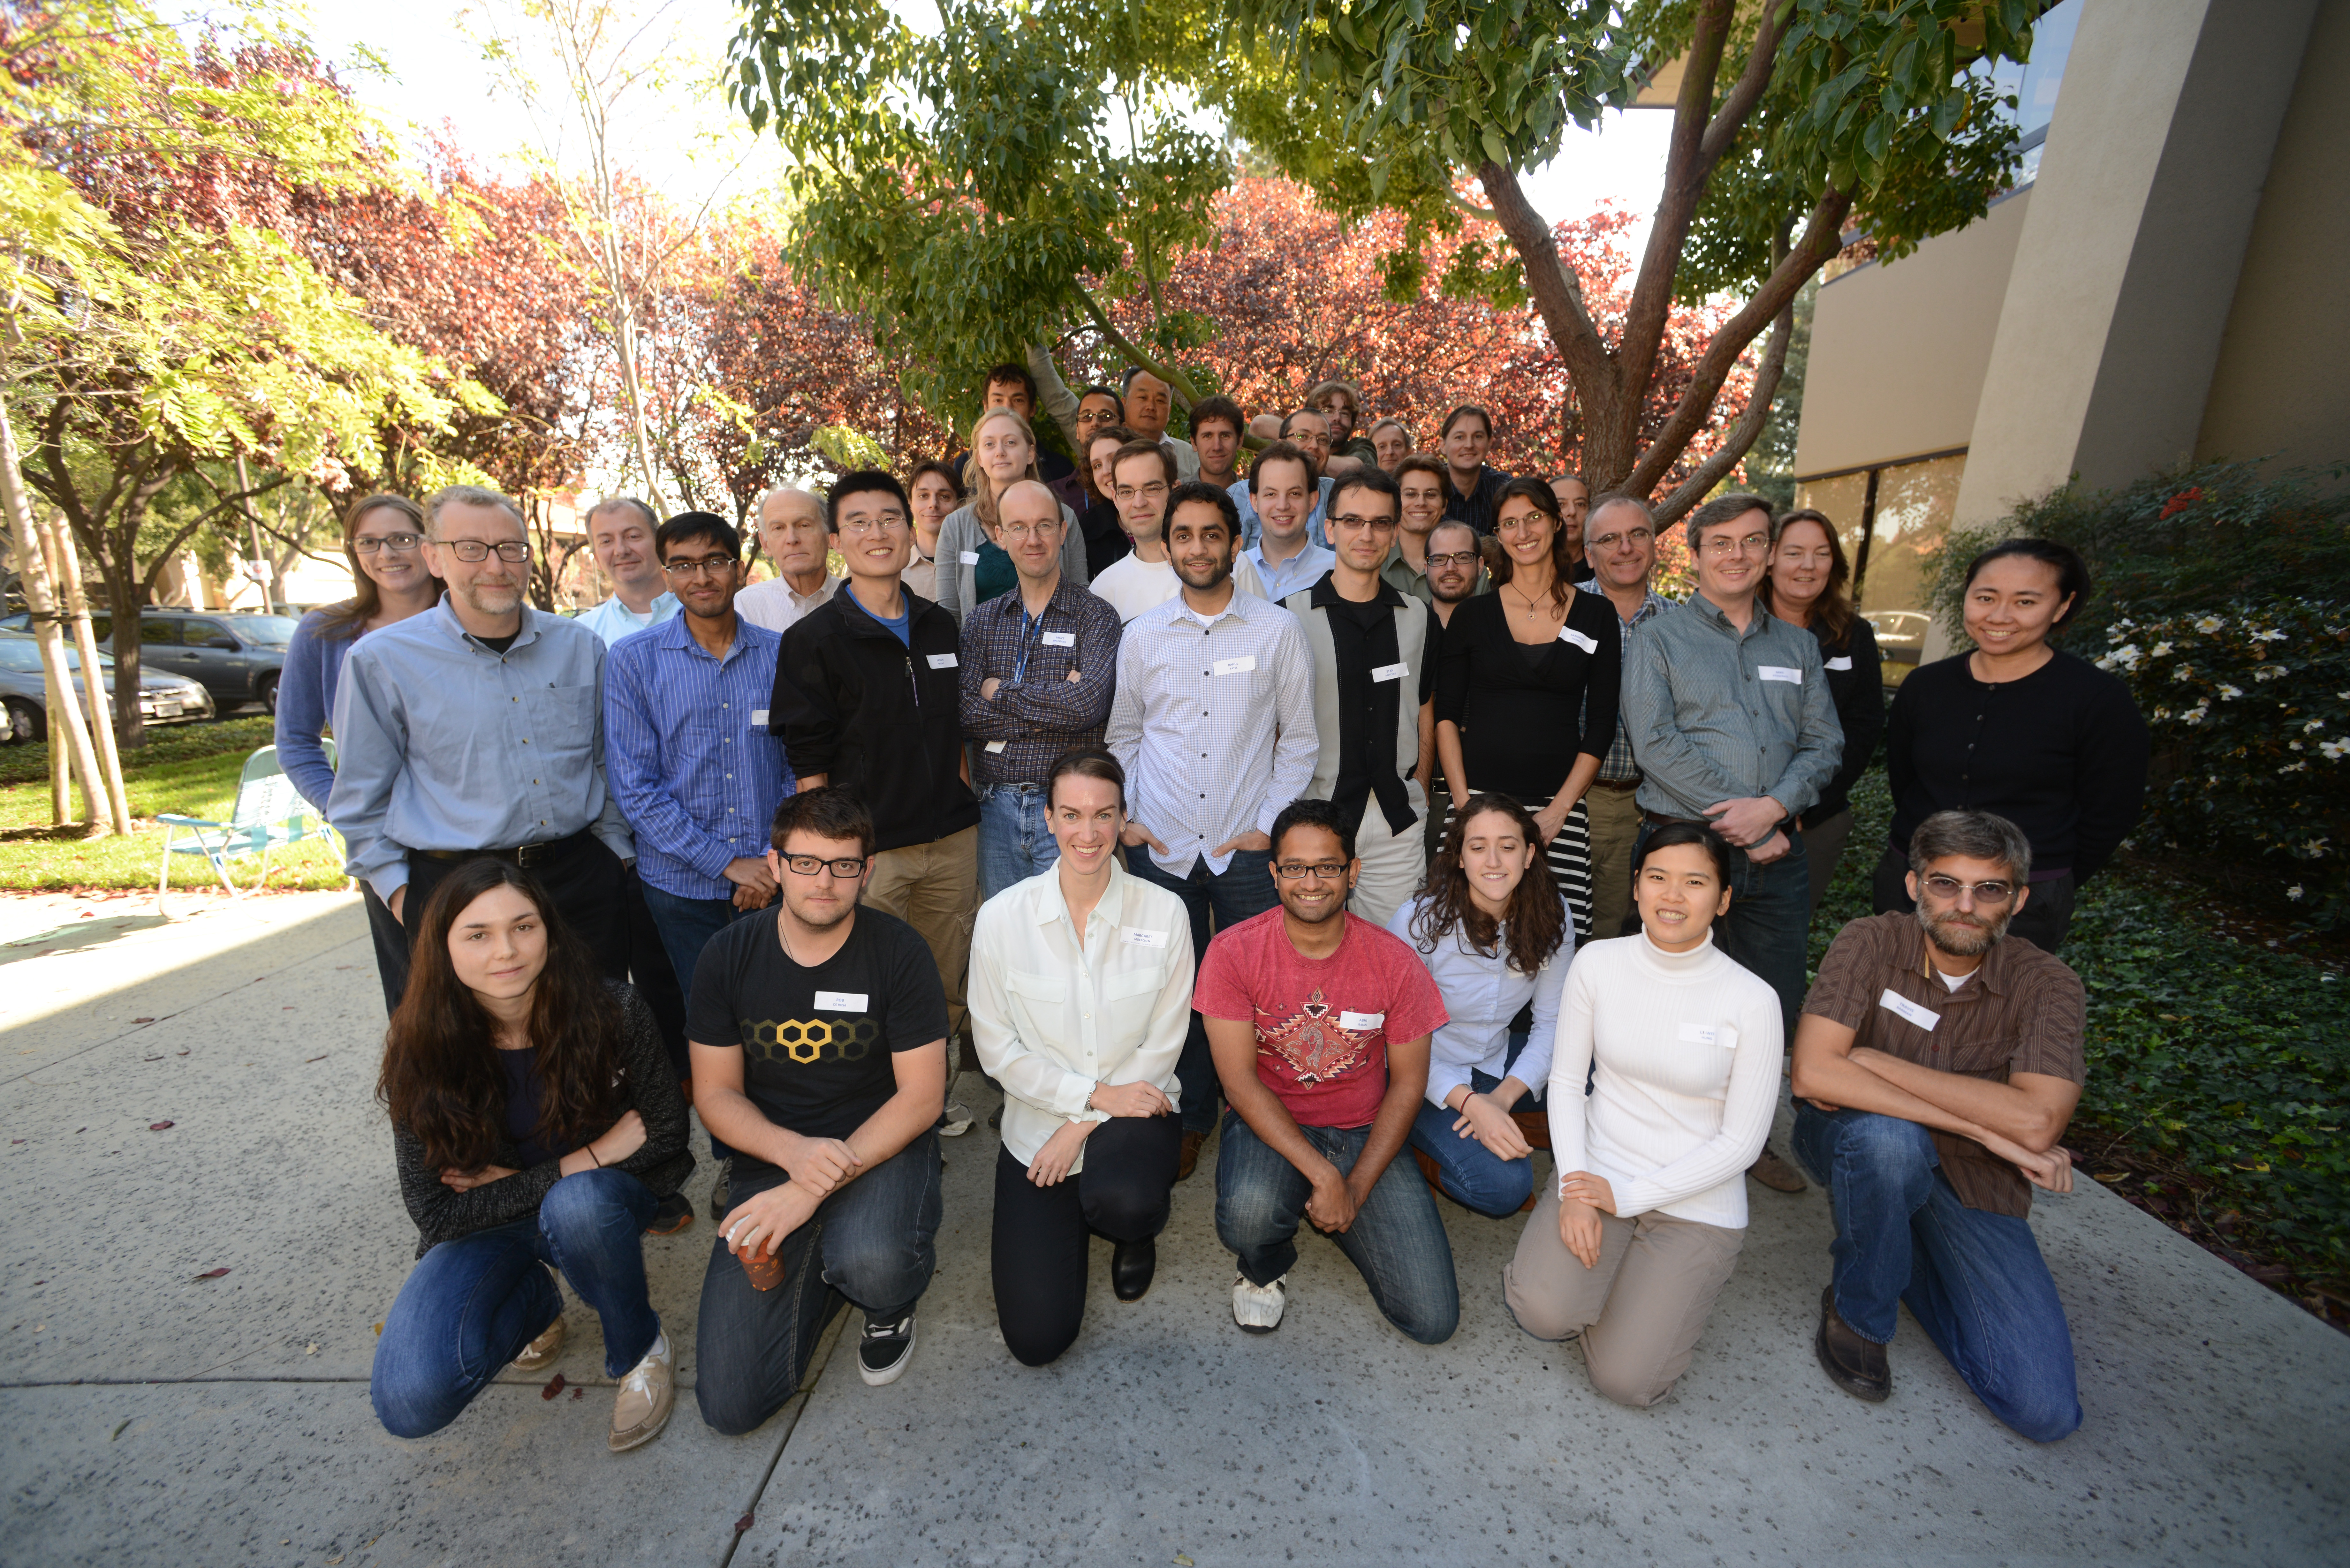 Group picture taken at the GPI Science Meeting in November 2013. 